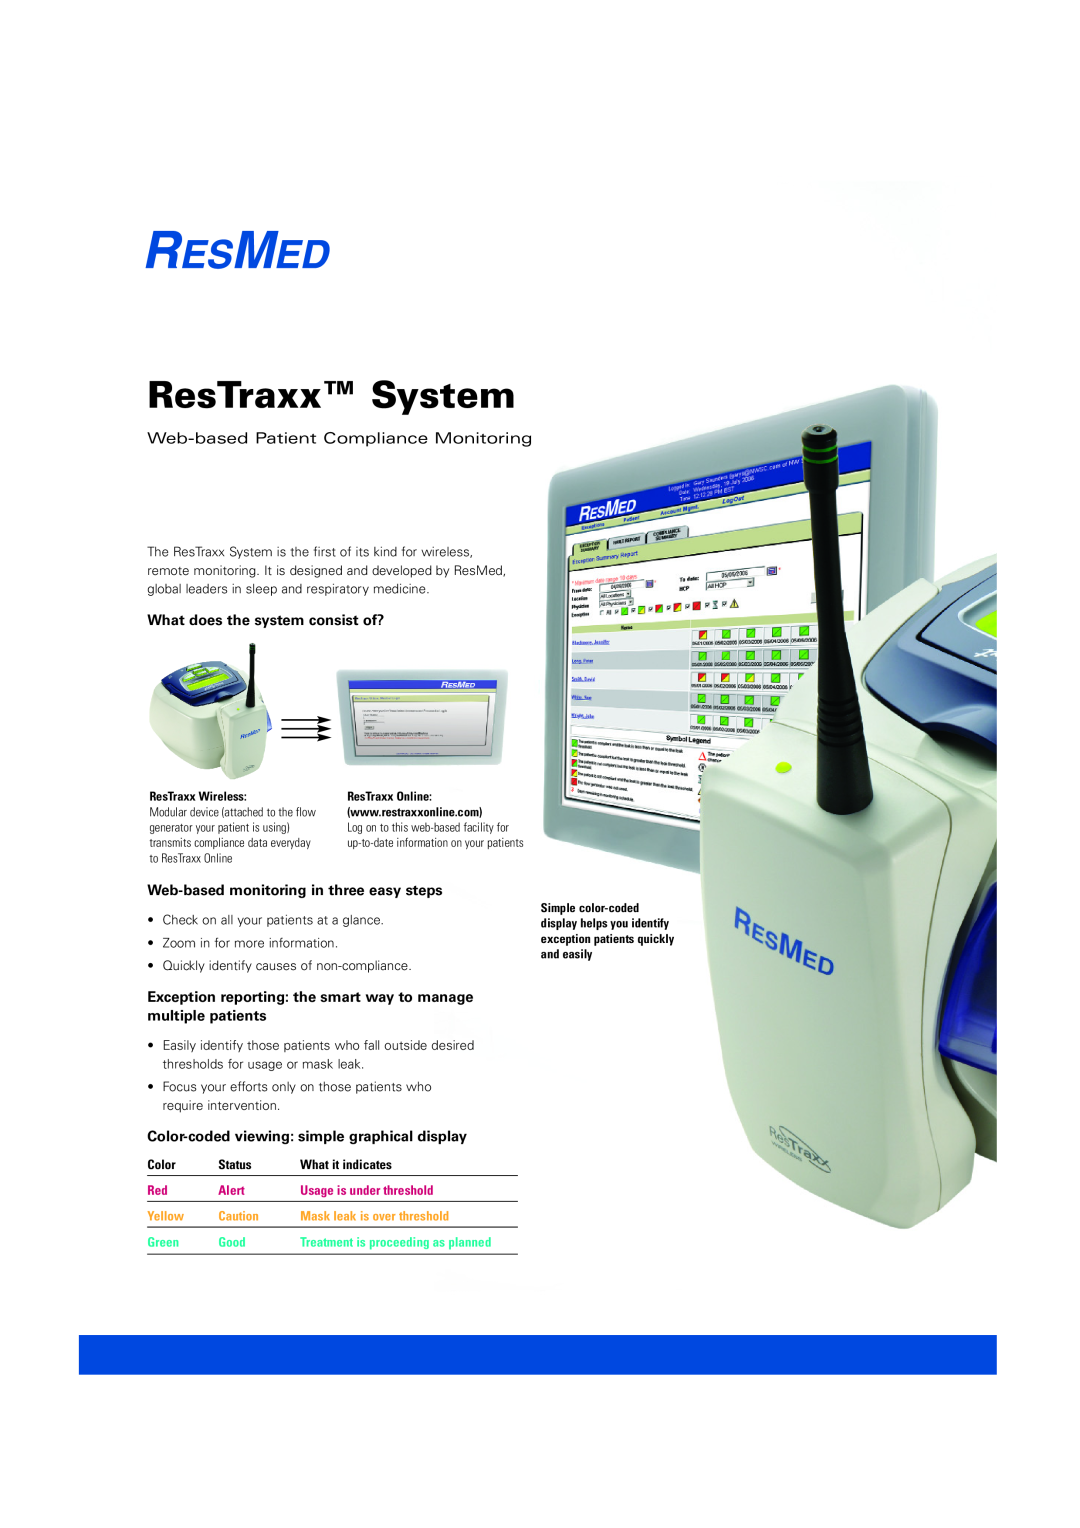 ResMed ResTraxx System manual What does the system consist of?, Web-based monitoring in three easy steps, Color, Status 